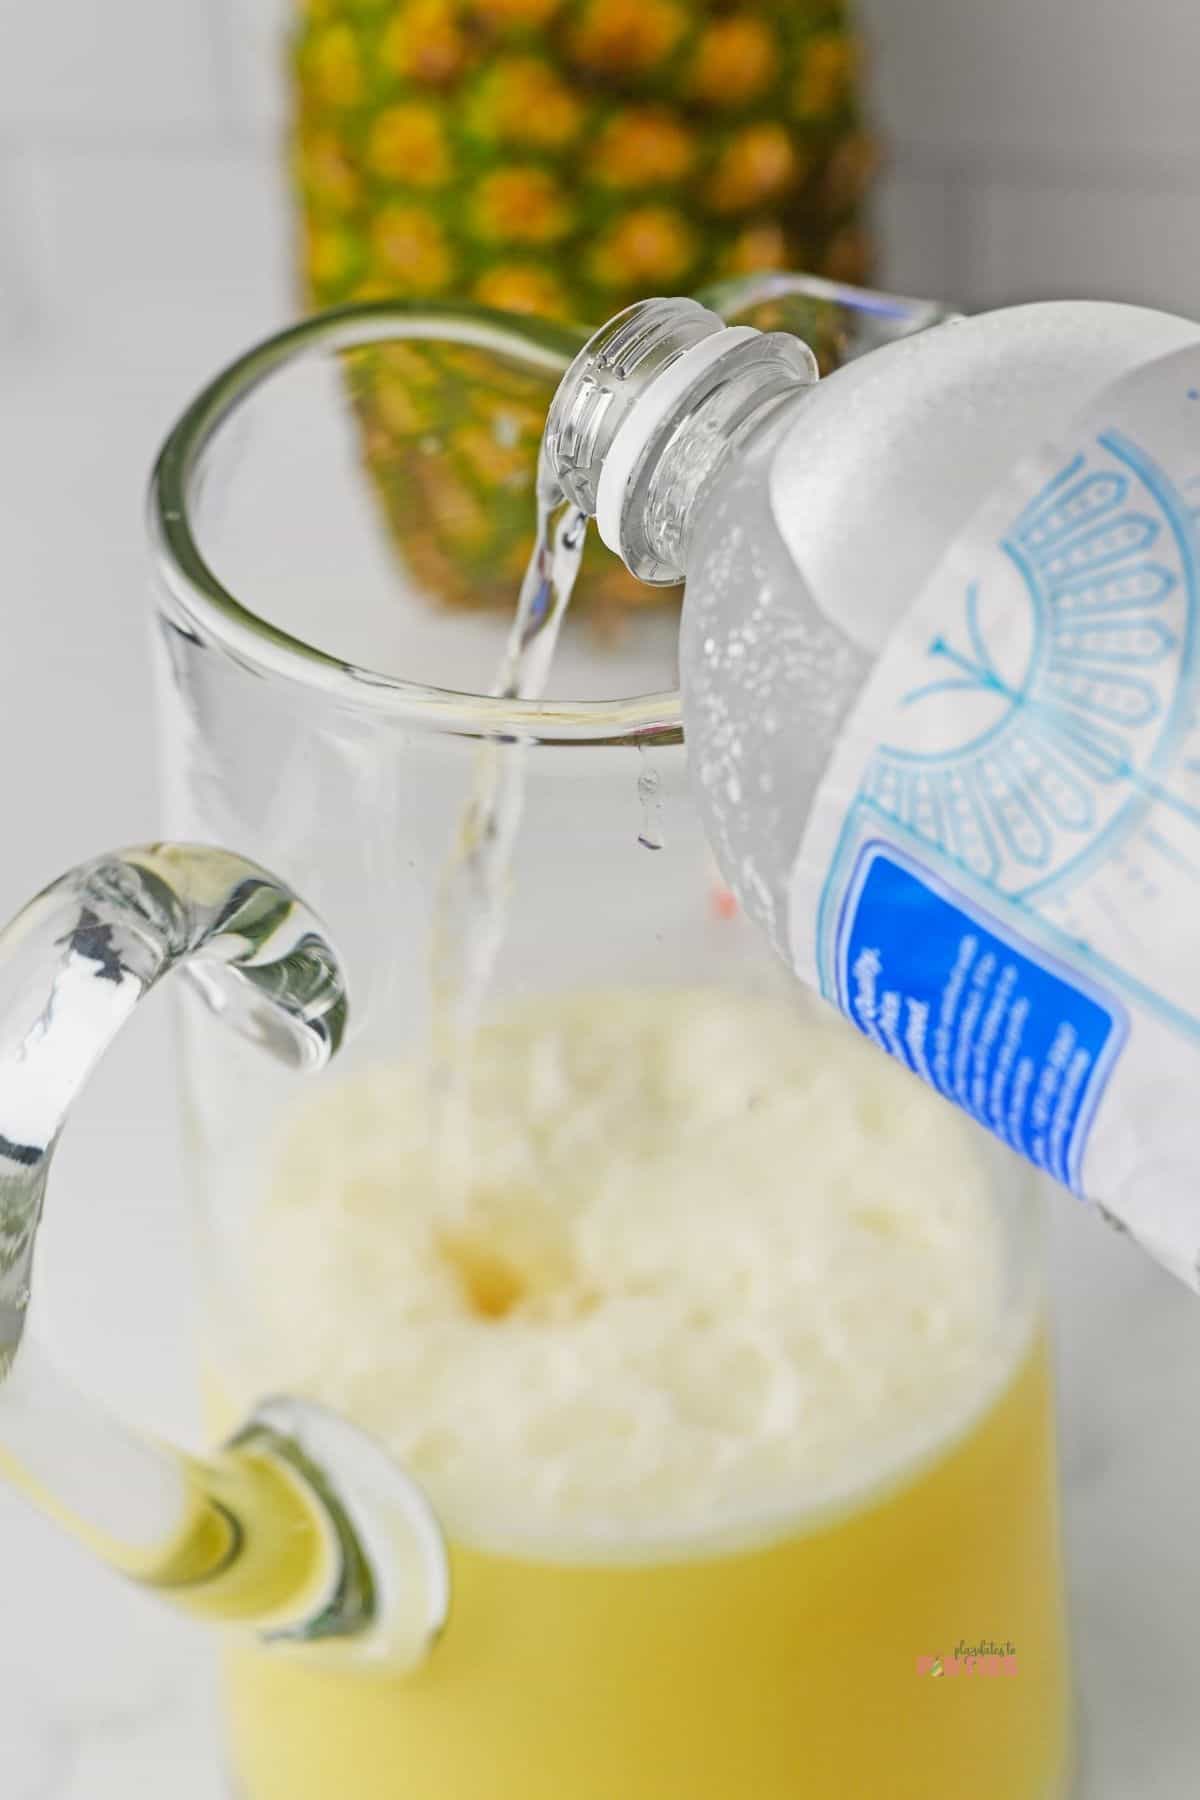 Pouring seltzer water into a pitcher of pineapple juice.